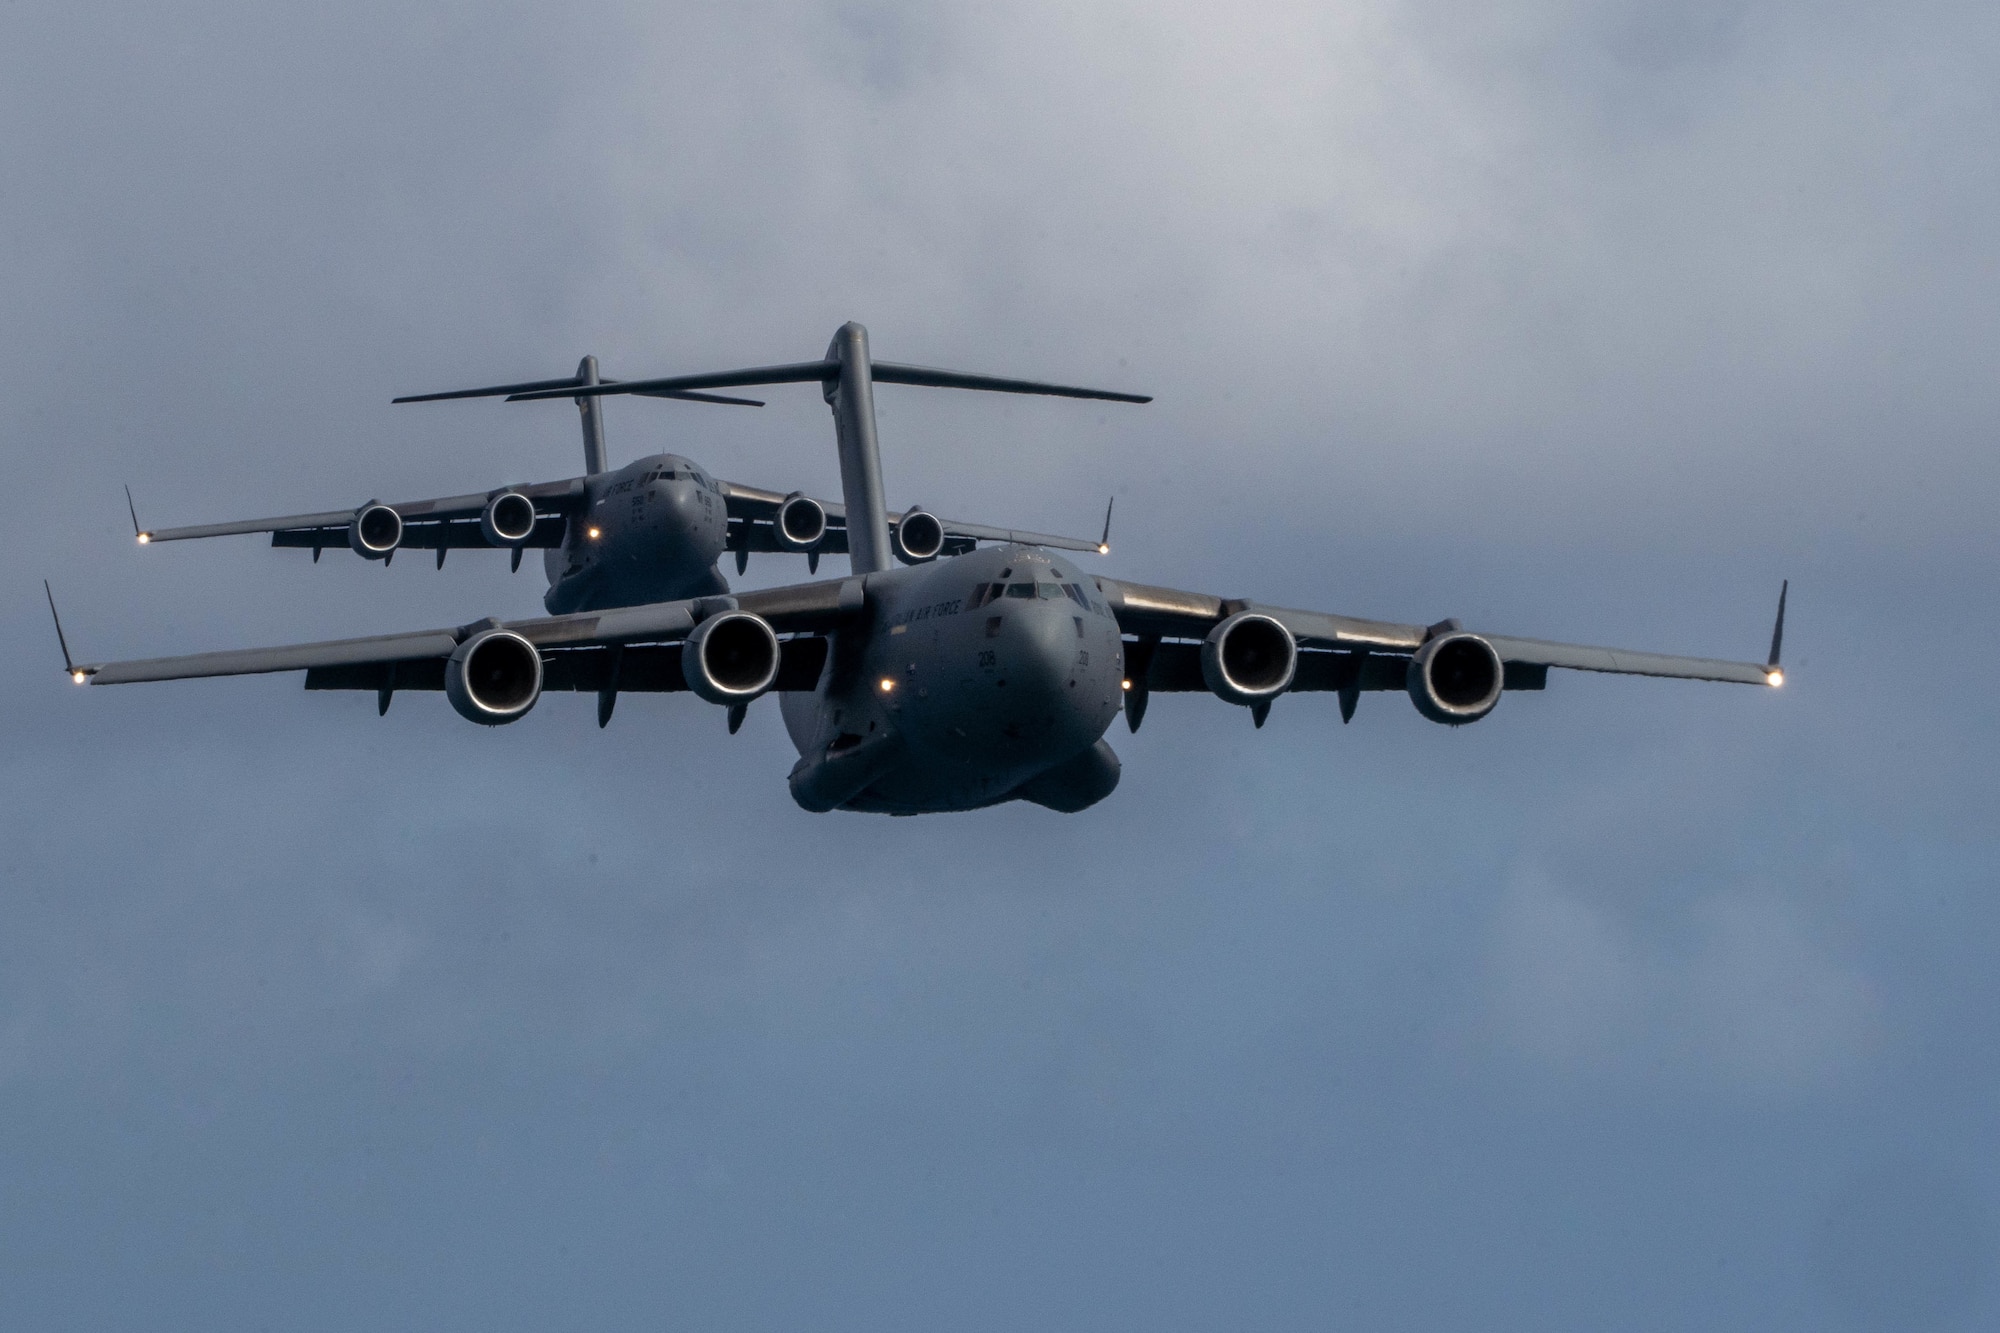 A Royal Australian Air Force C-17 Globemaster III flies in front of a U.S. C-17 during an aerial maneuver training mission around the Hawaiian islands as part of Exercise Global Dexterity 2022 at Joint Base Pearl Harbor-Hickam, Hawaii, May 4, 2022. The RAAF and USAF conducted joint flying missions alongside each other and swapped aircrew members to better learn of each others’ procedures and techniques. (U.S. Air Force photo by Airman 1st Class Makensie Cooper)